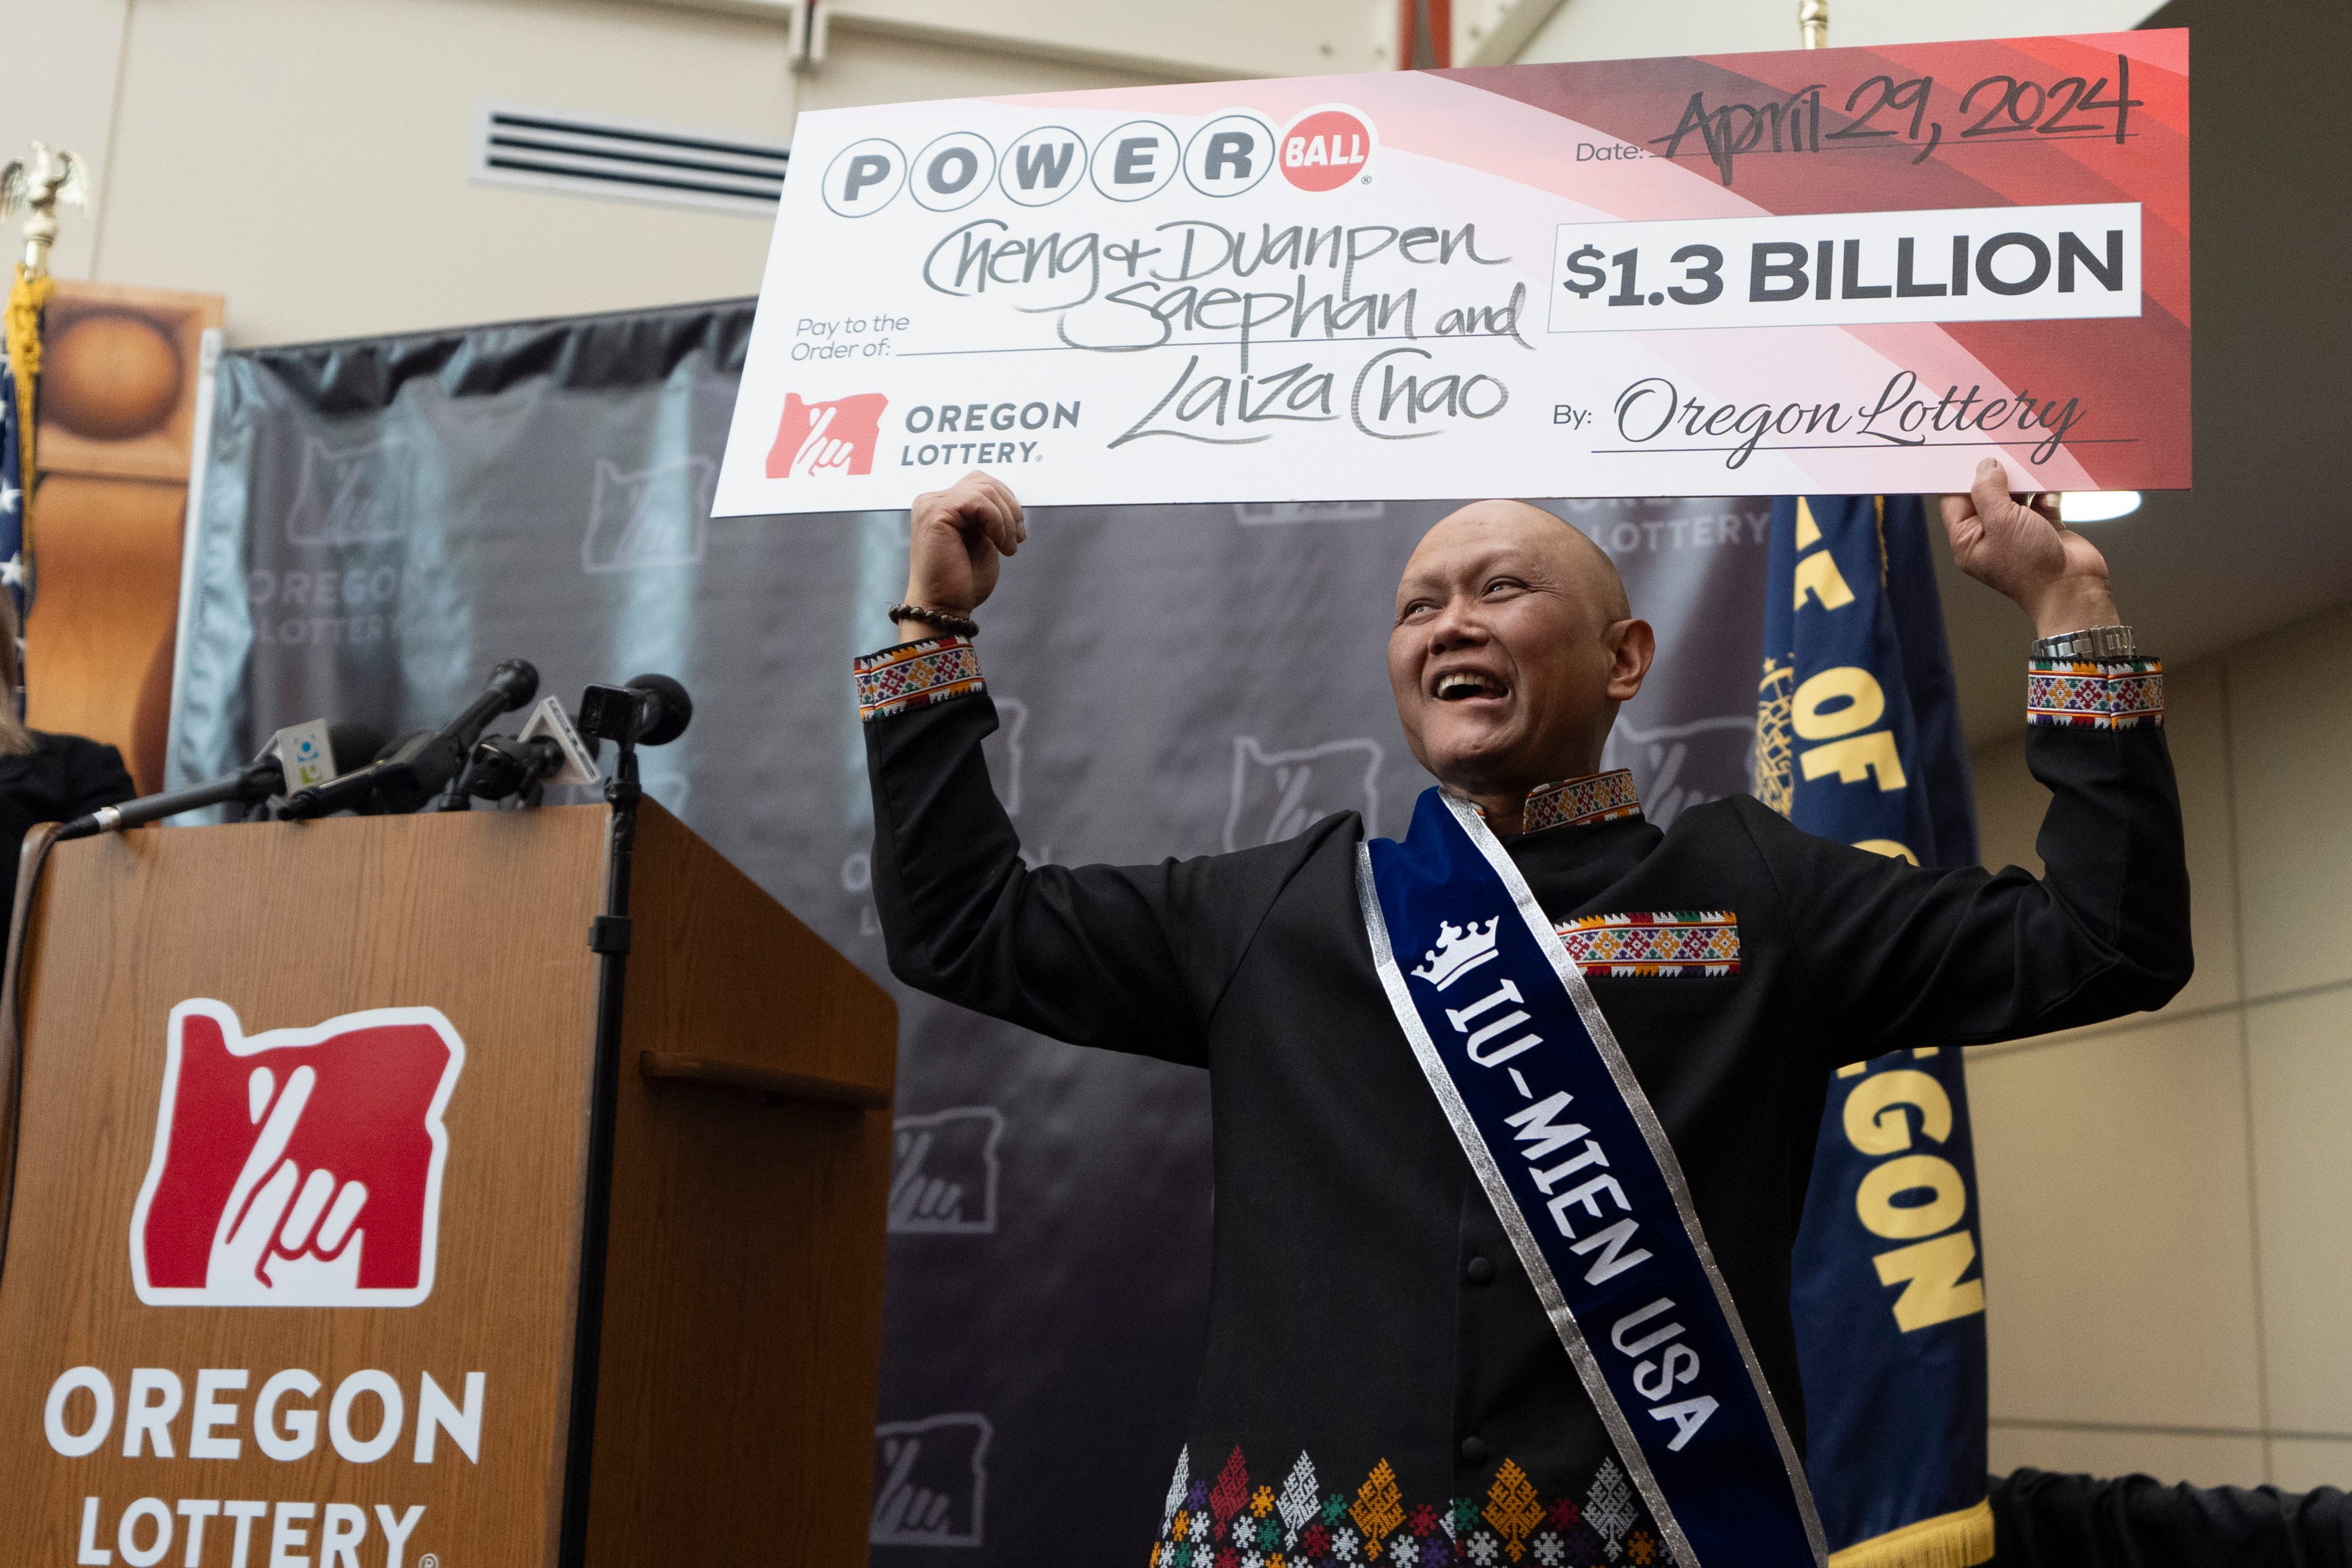 Cheng “Charlie” Saephan displays a cheque above his head after it was revealed that he was one of the winners of the $1.3 billion Powerball jackpot on Monday. Photo: AP